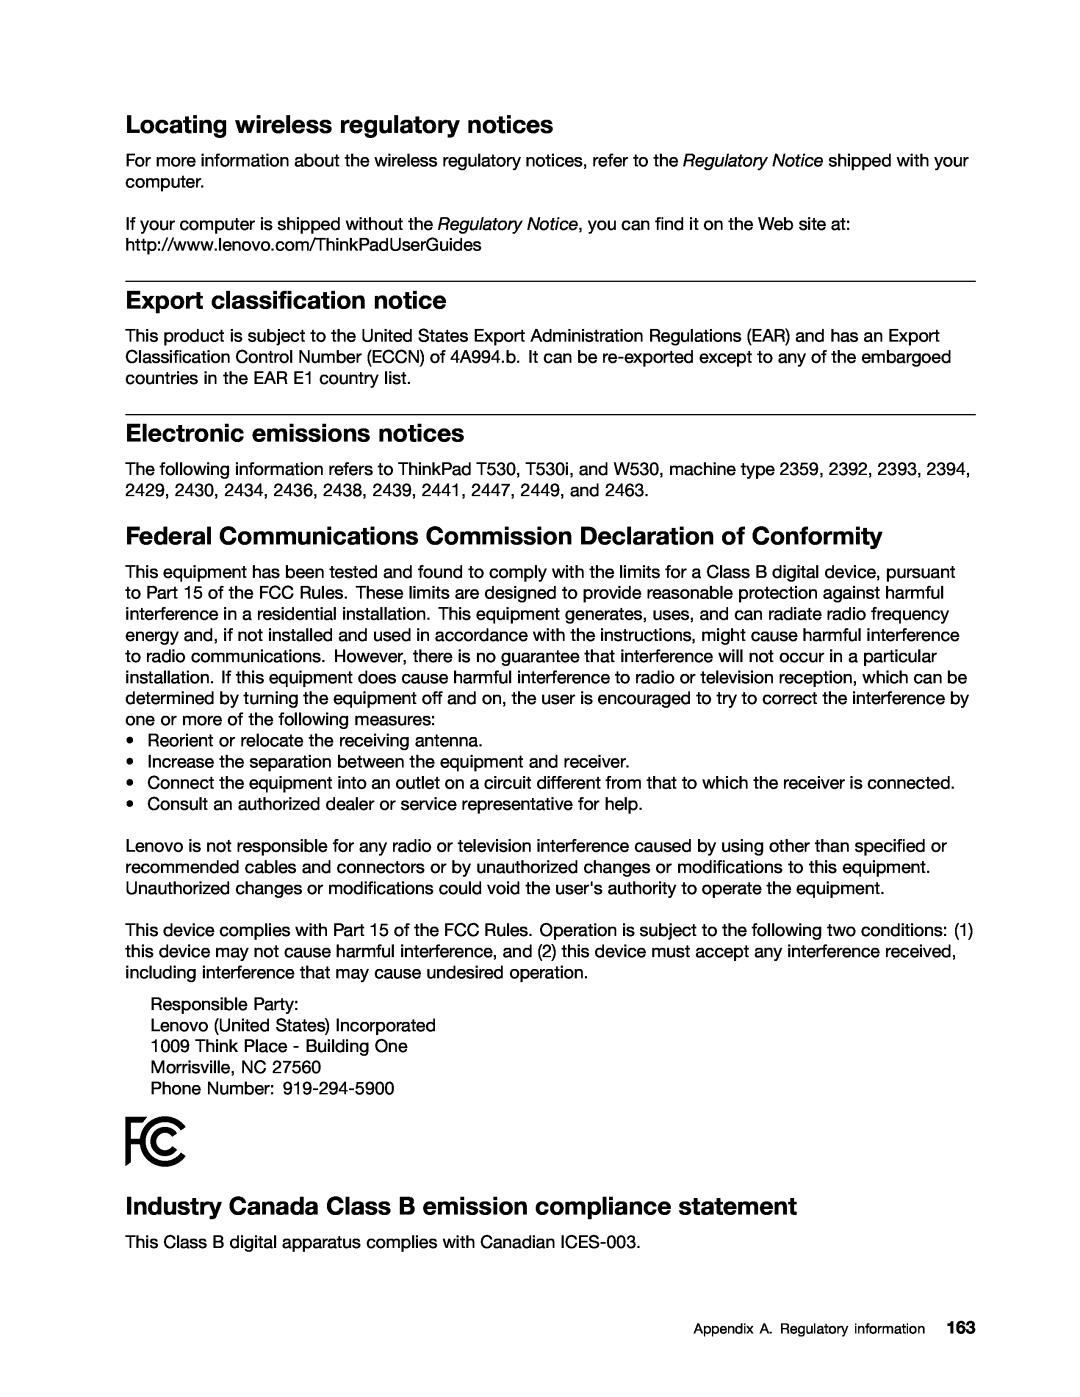 Lenovo 243858U, W530, T530 Locating wireless regulatory notices, Export classification notice, Electronic emissions notices 